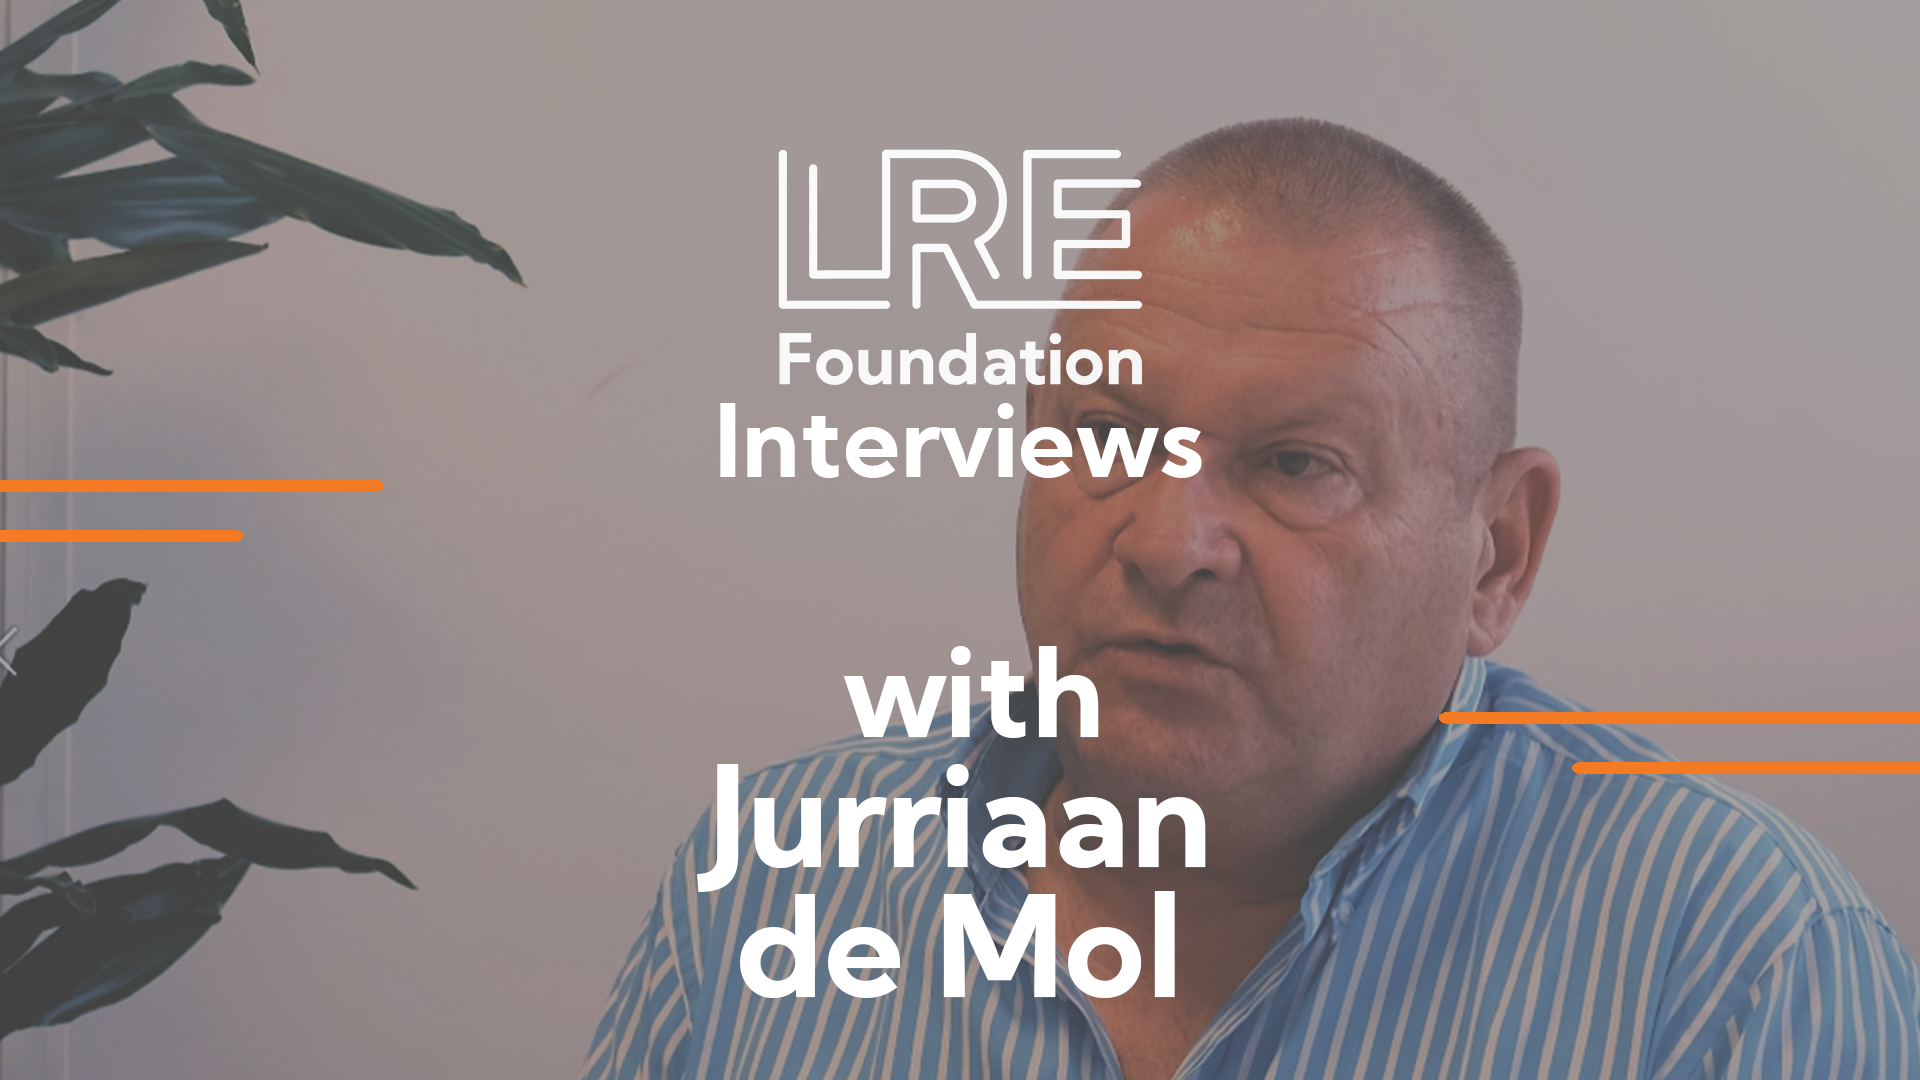 Jurriaan de Mol appointed Honorary Chairman of the LRE Foundation Board